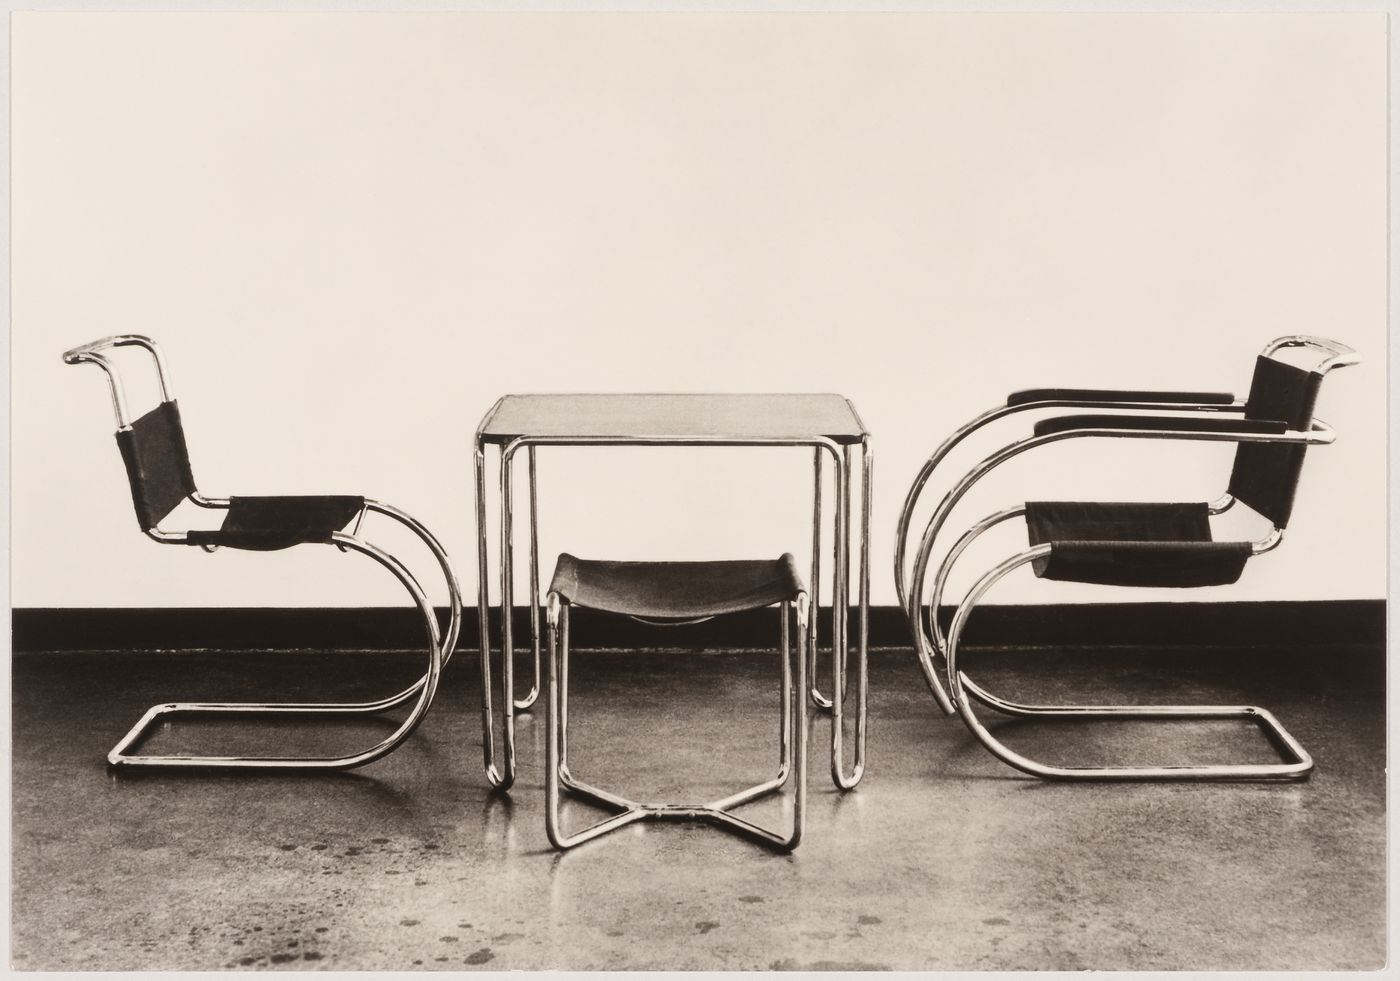 Interior view of the Bauhaus building showing two chairs designed by Mies van der Rohe and a table and stool designed by Marcel Breuer, Dessau, Germany